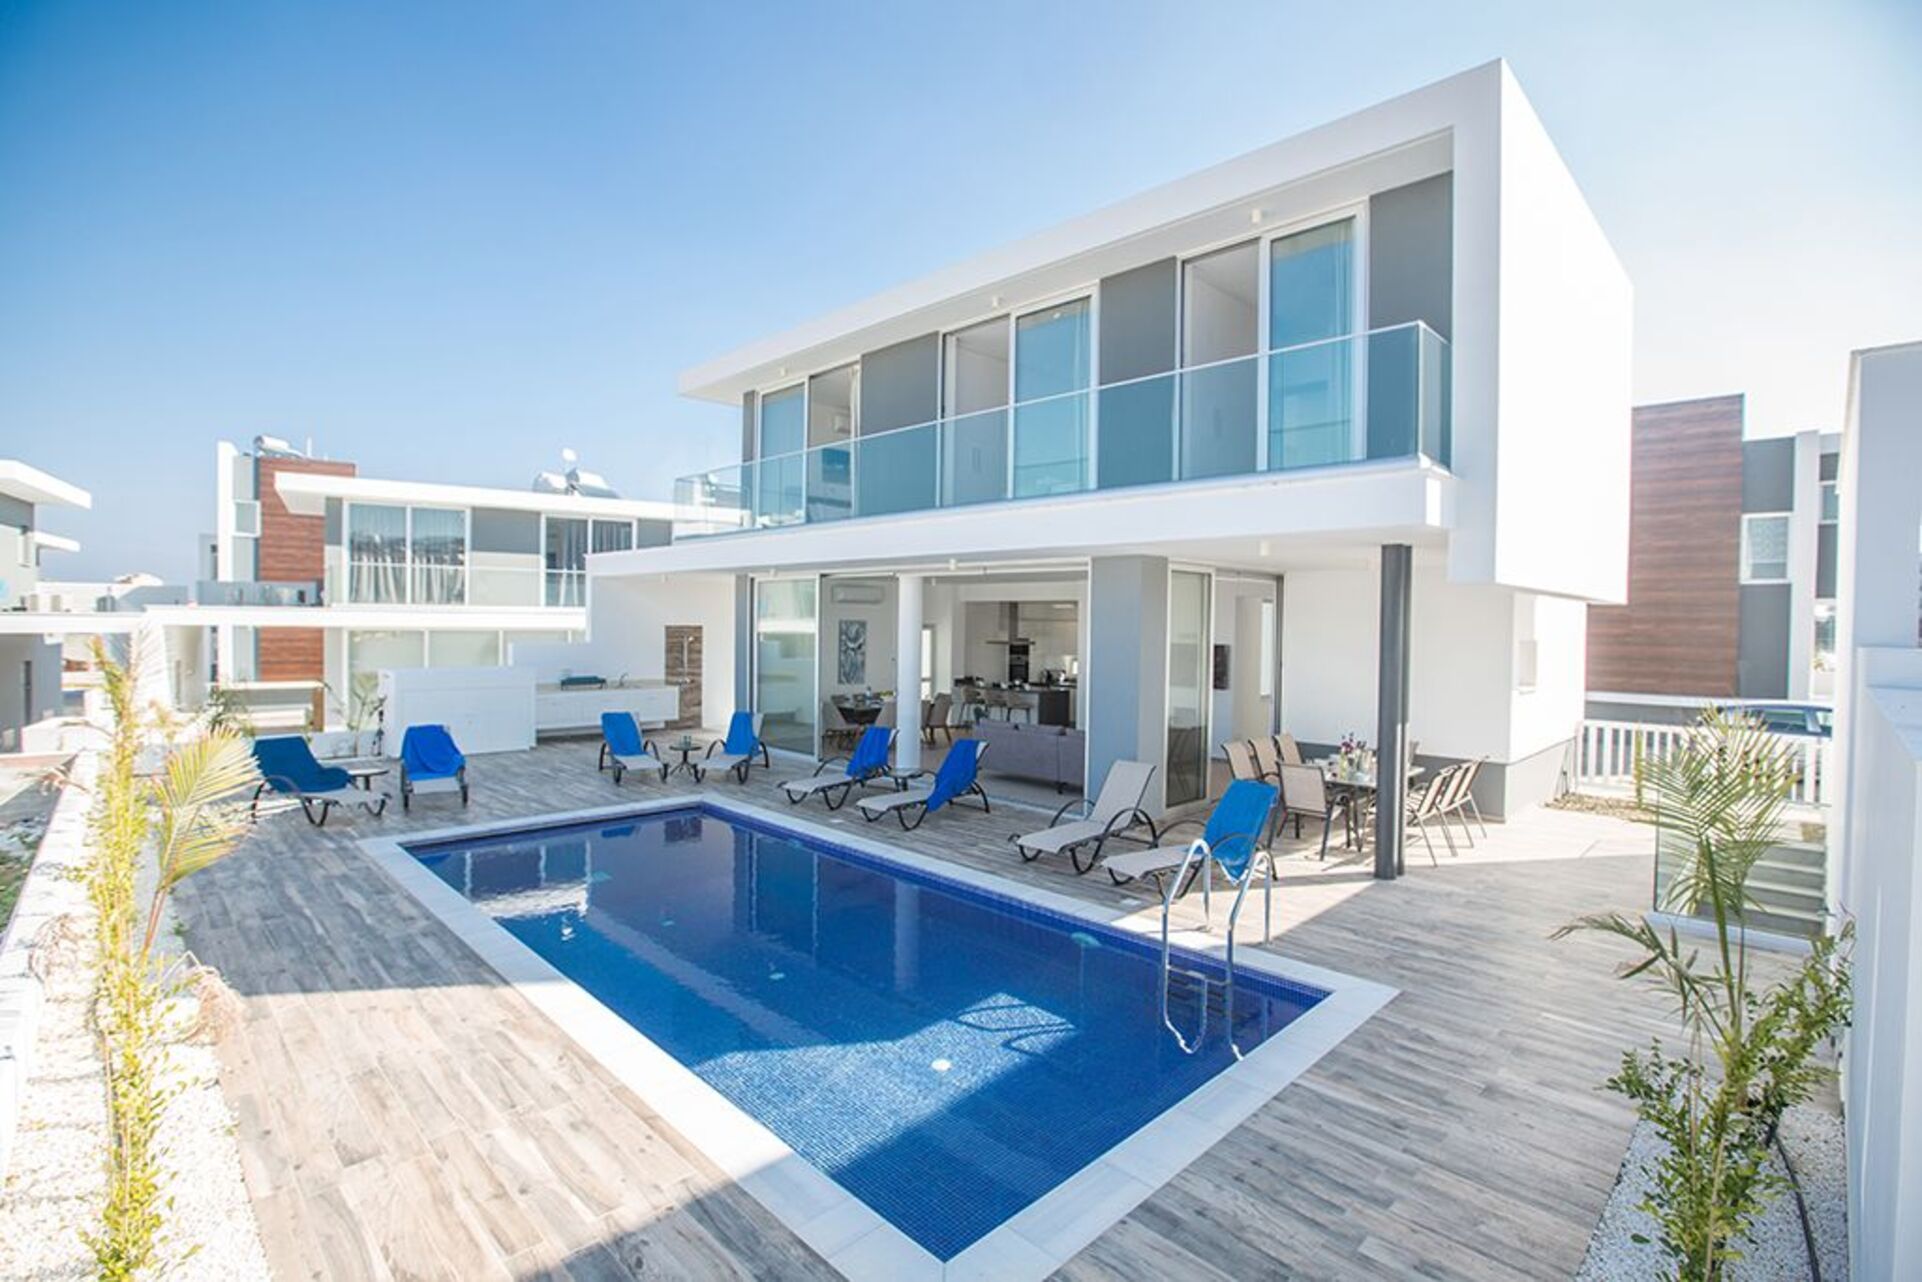 Property Image 1 - Rent Your Dream Protaras Holiday Villa and Look Forward to Relaxing Beside Your Private Pool, Protaras Vil